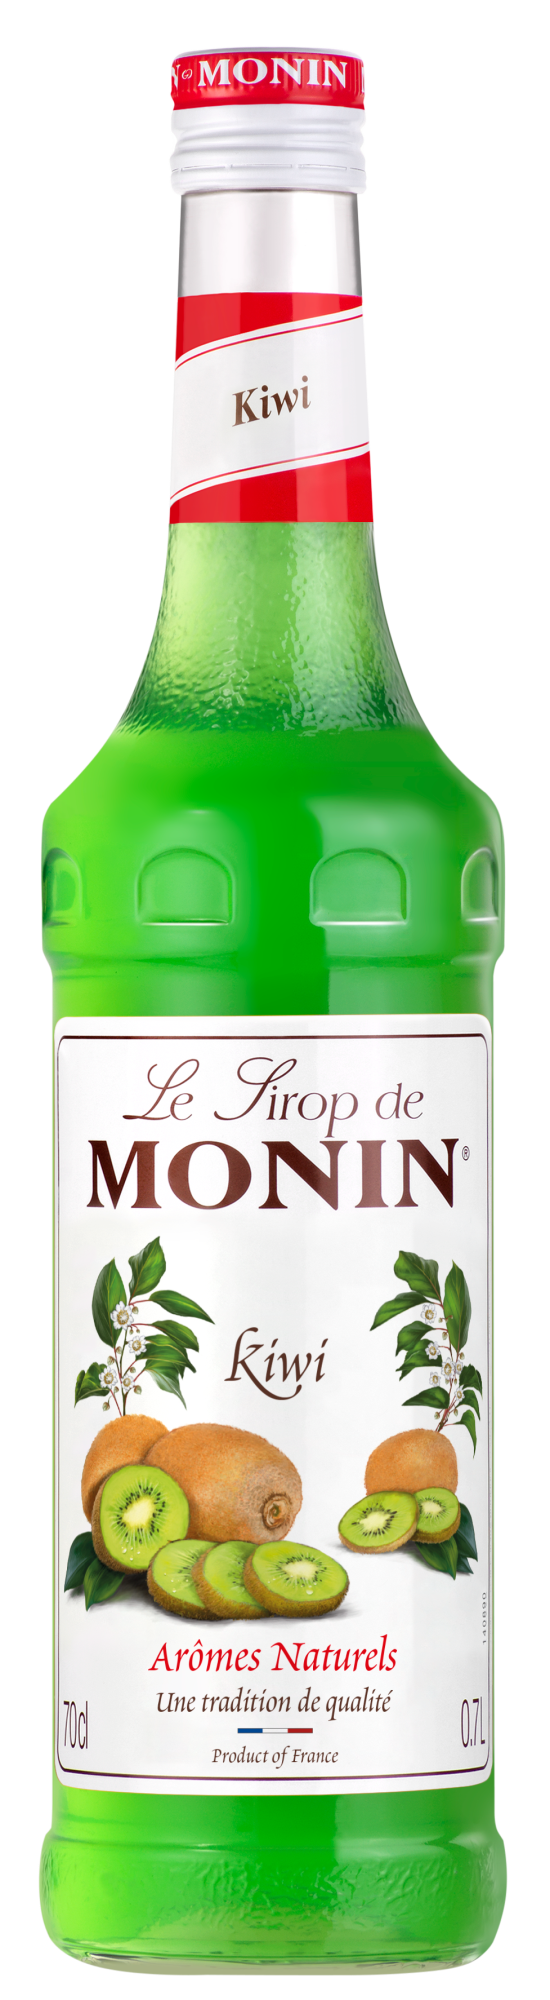 Buy MONIN Kiwi Syrup. It captures the bright, tropical flavour and aroma. It is perfect for lemonades, iced teas, cocktails.